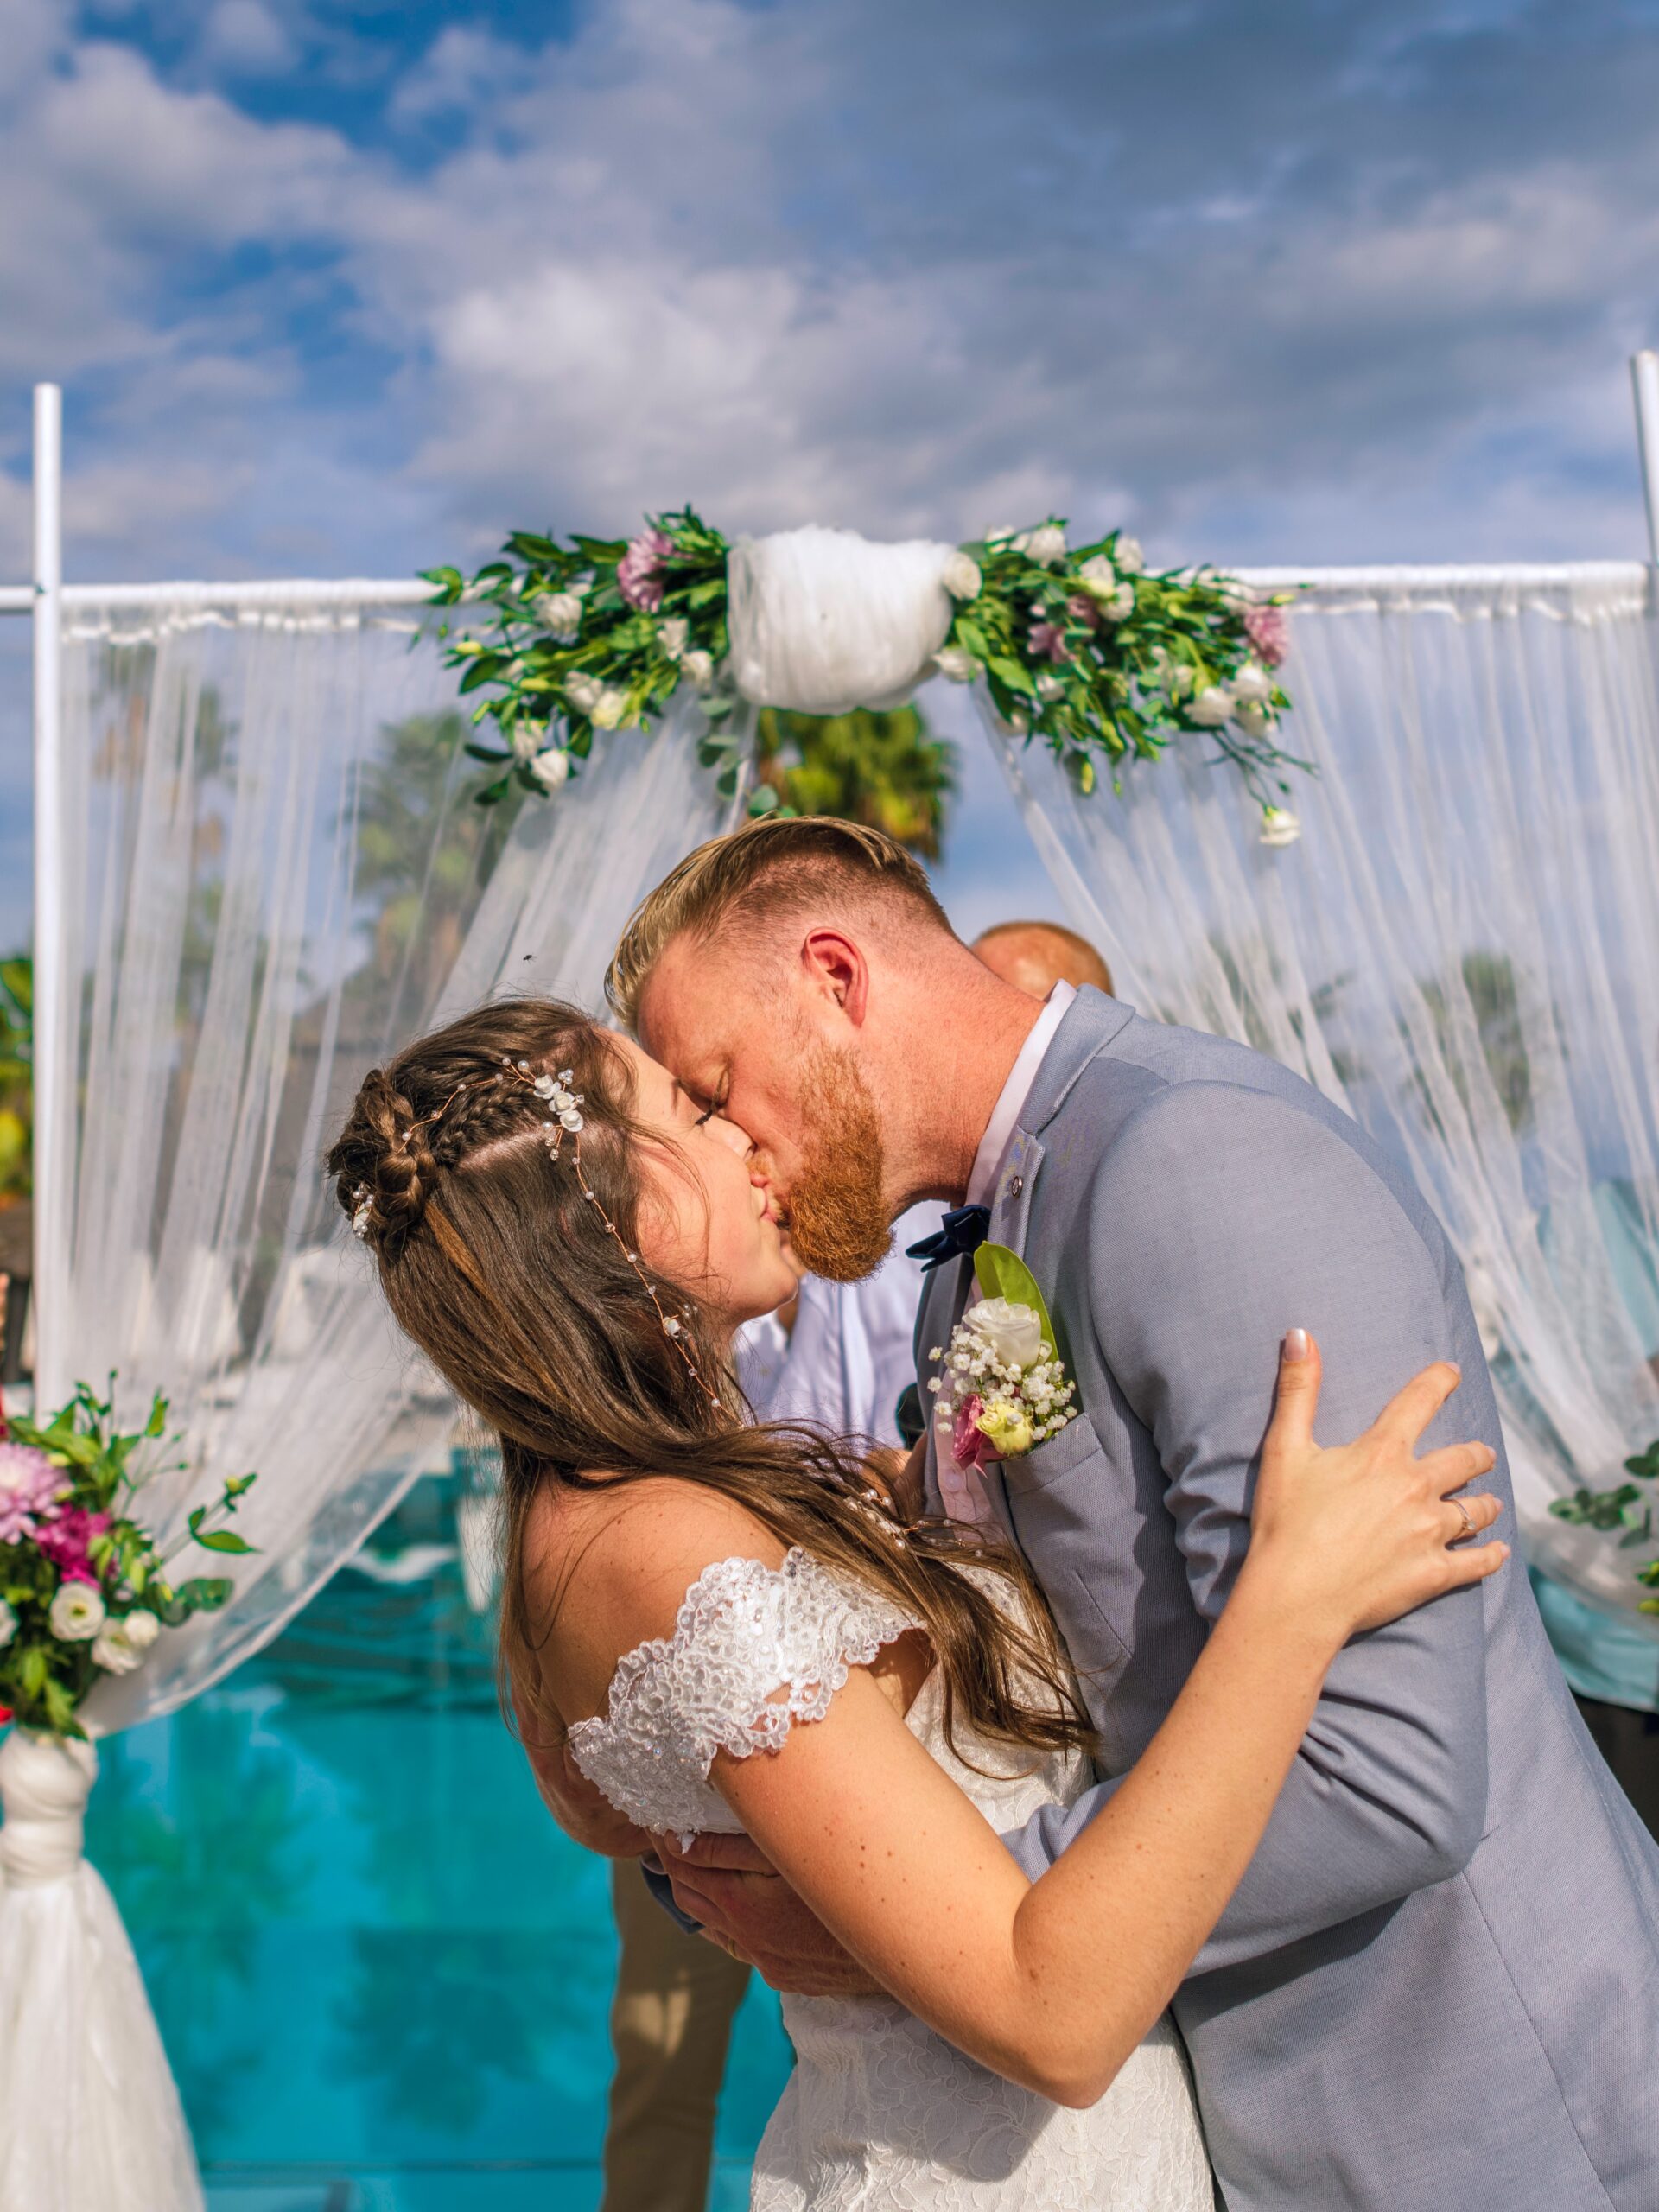 The Importance of Wedding DJ’s and Photographers Working Together